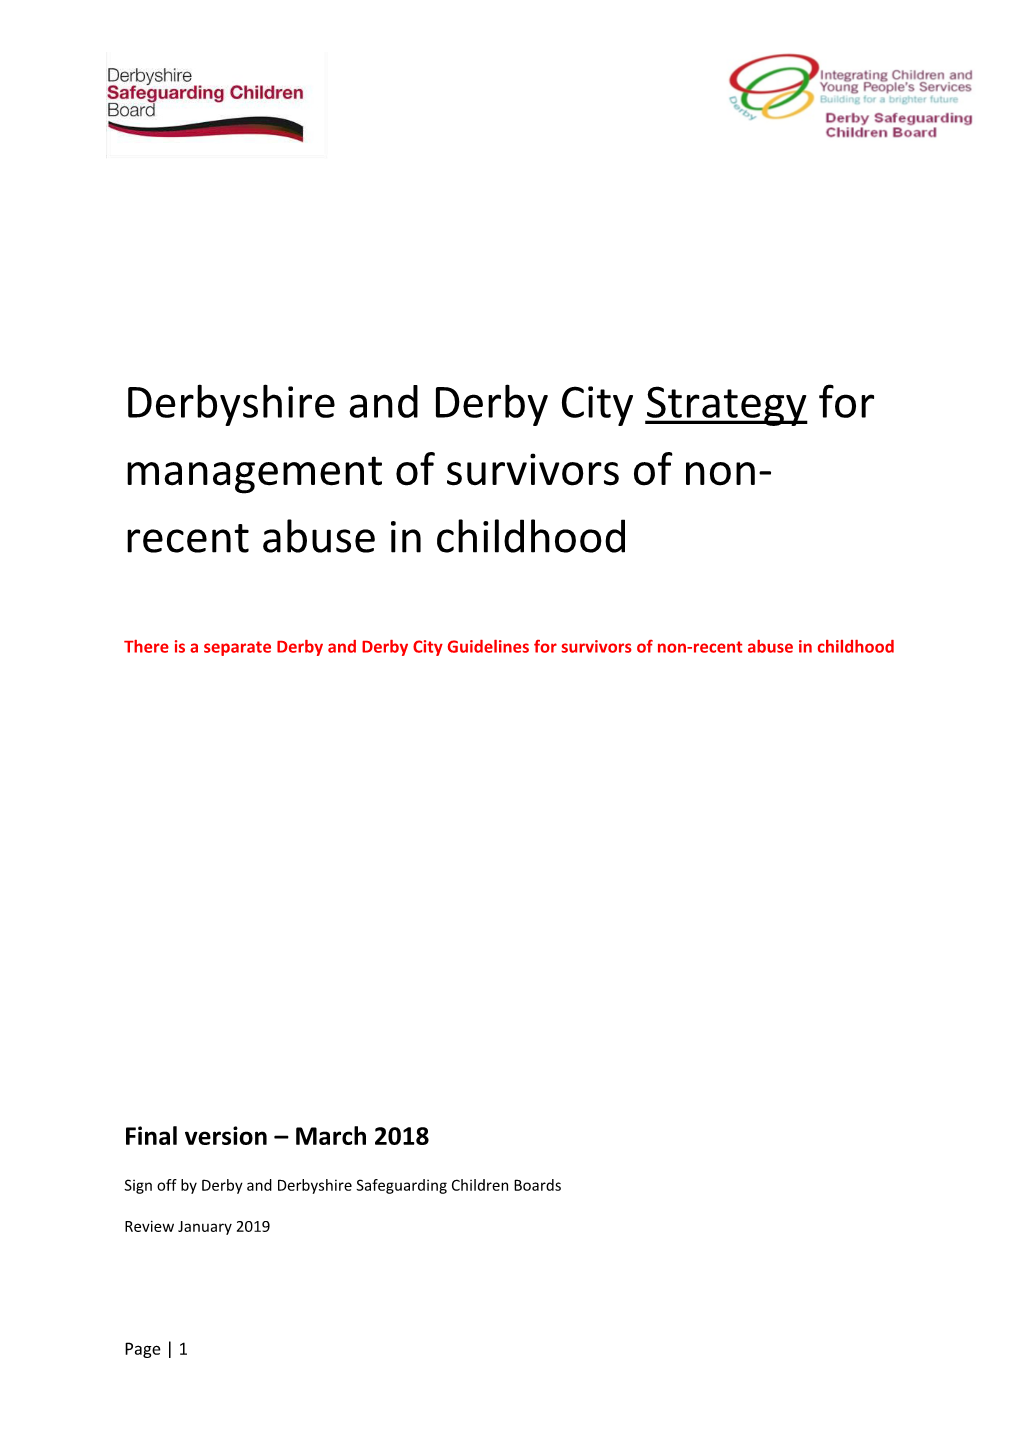 Derbyshire and Derby City Strategyfor Management of Survivors of Non-Recent Abuse in Childhood